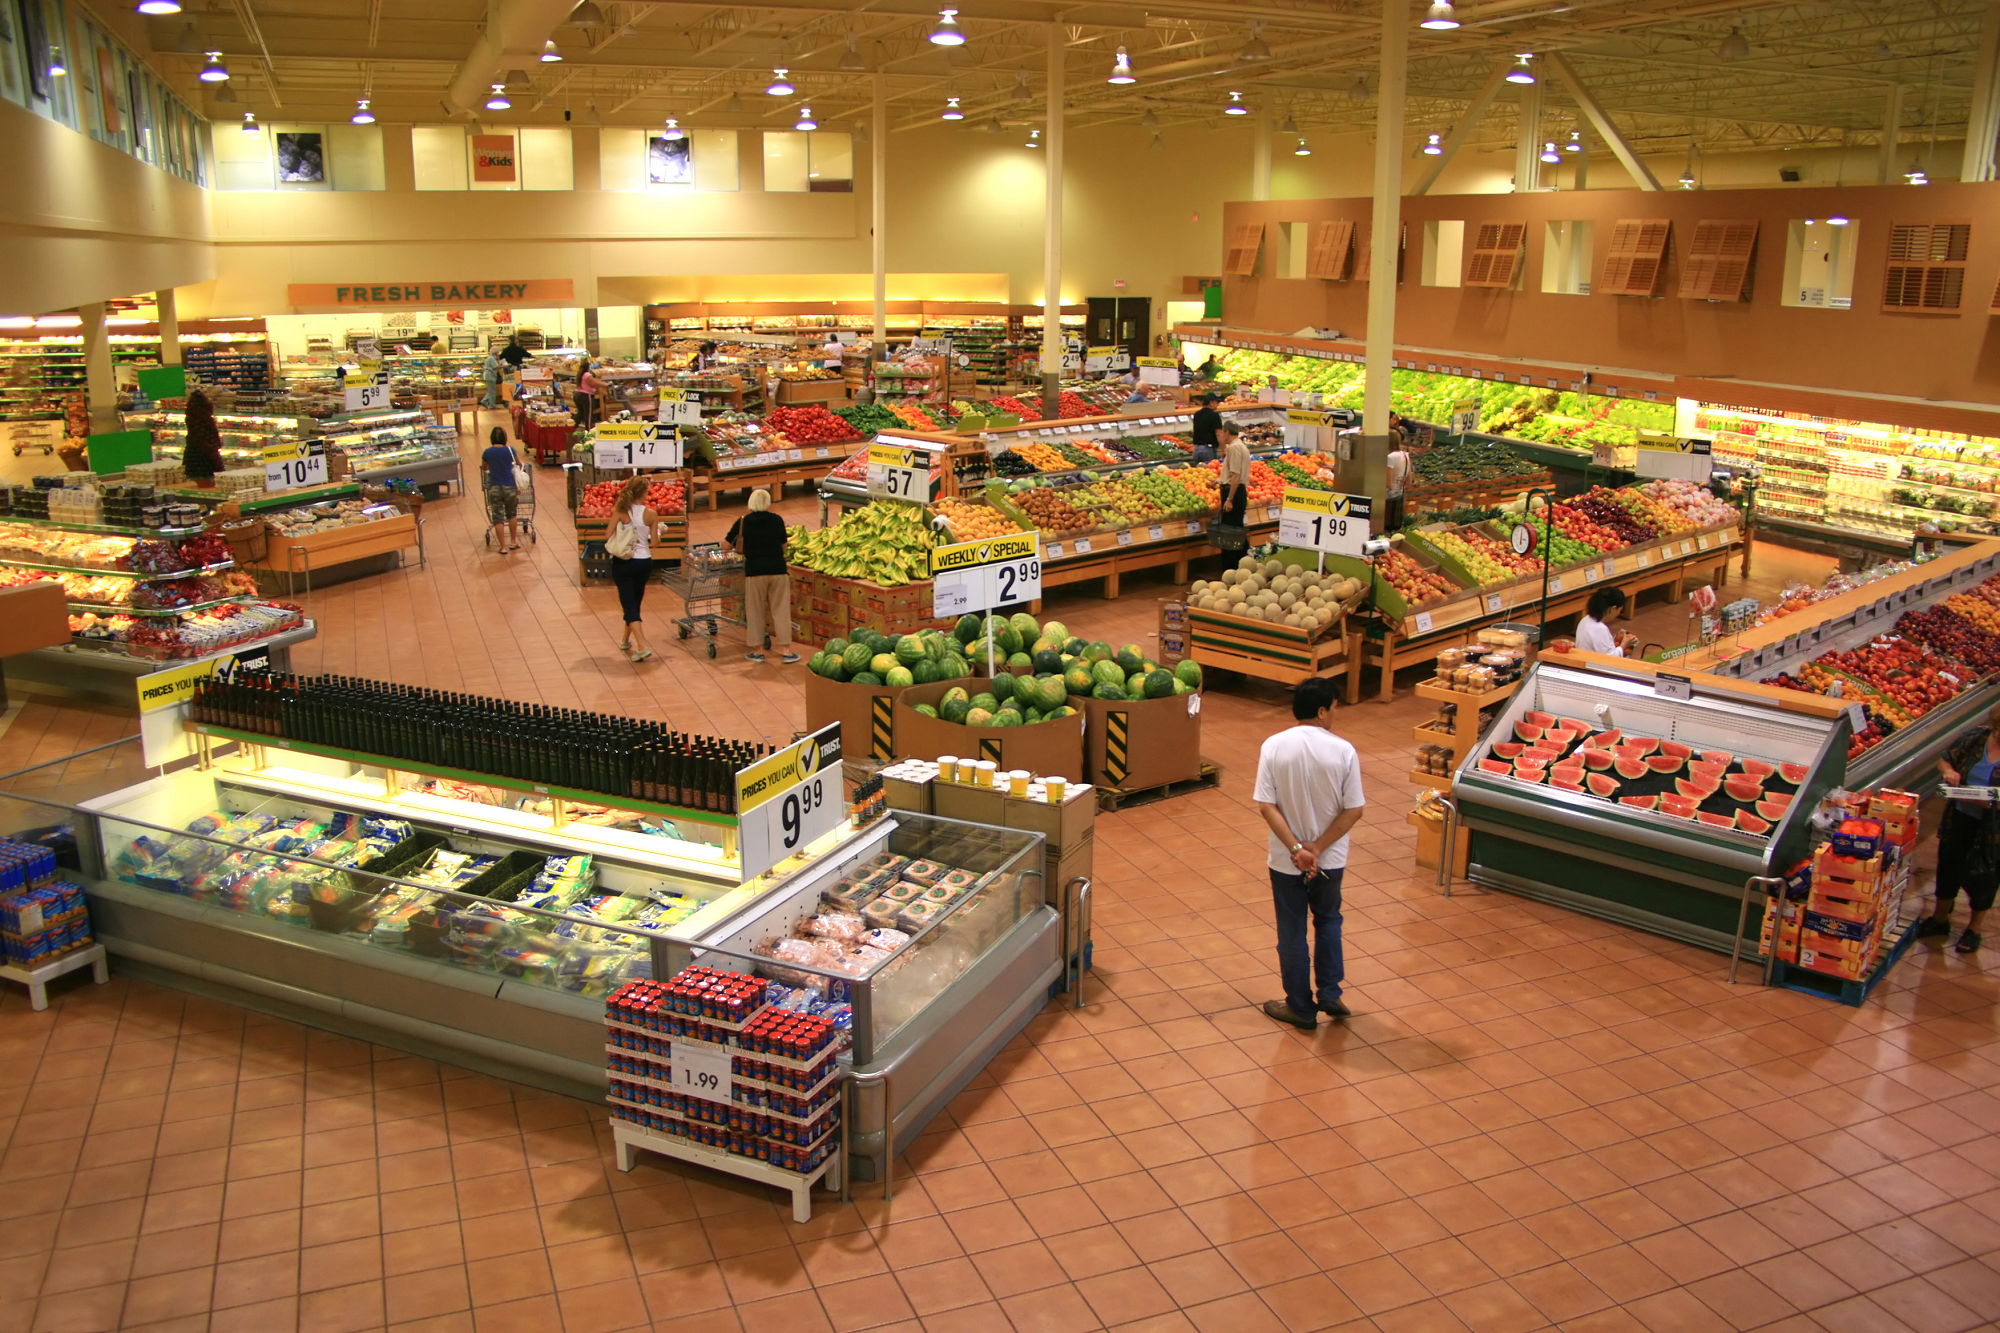 Produce Section of Grocery Store